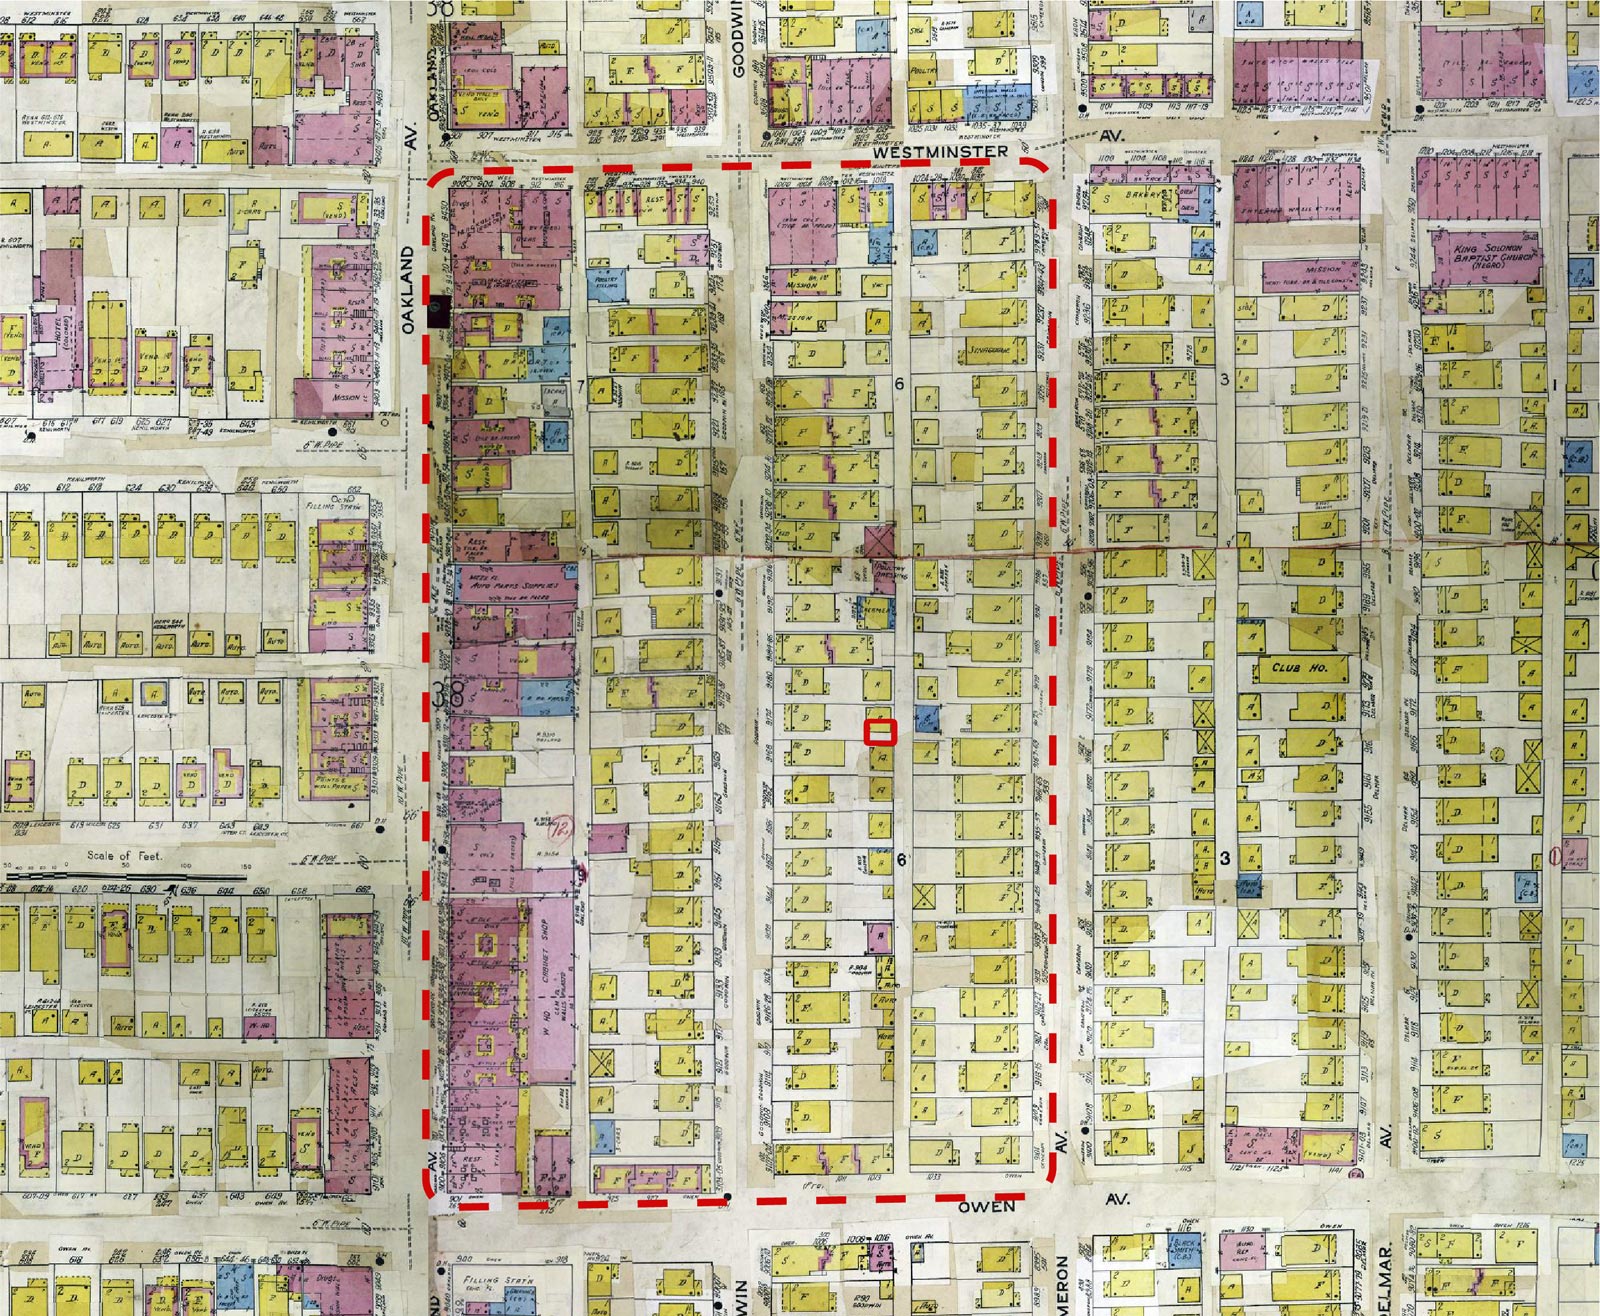 1951 Sanborn fire insurance map of North End of Detroit